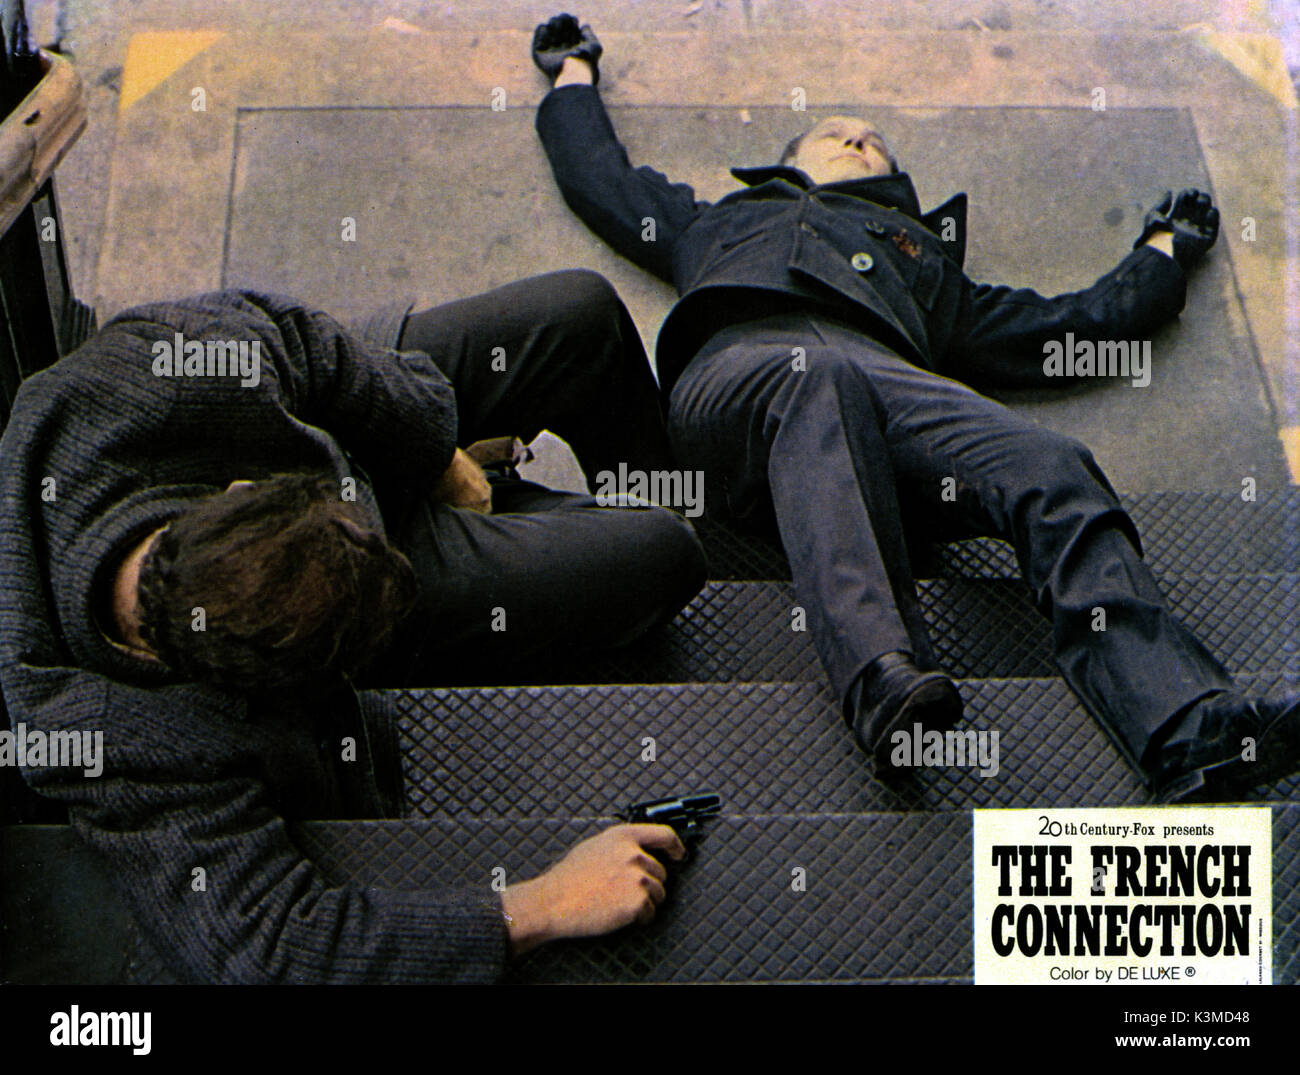 THE FRENCH CONNECTION [US 1971] GENE HACKMAN, MARCEL BOZZUFFI     Date: 1971 Stock Photo